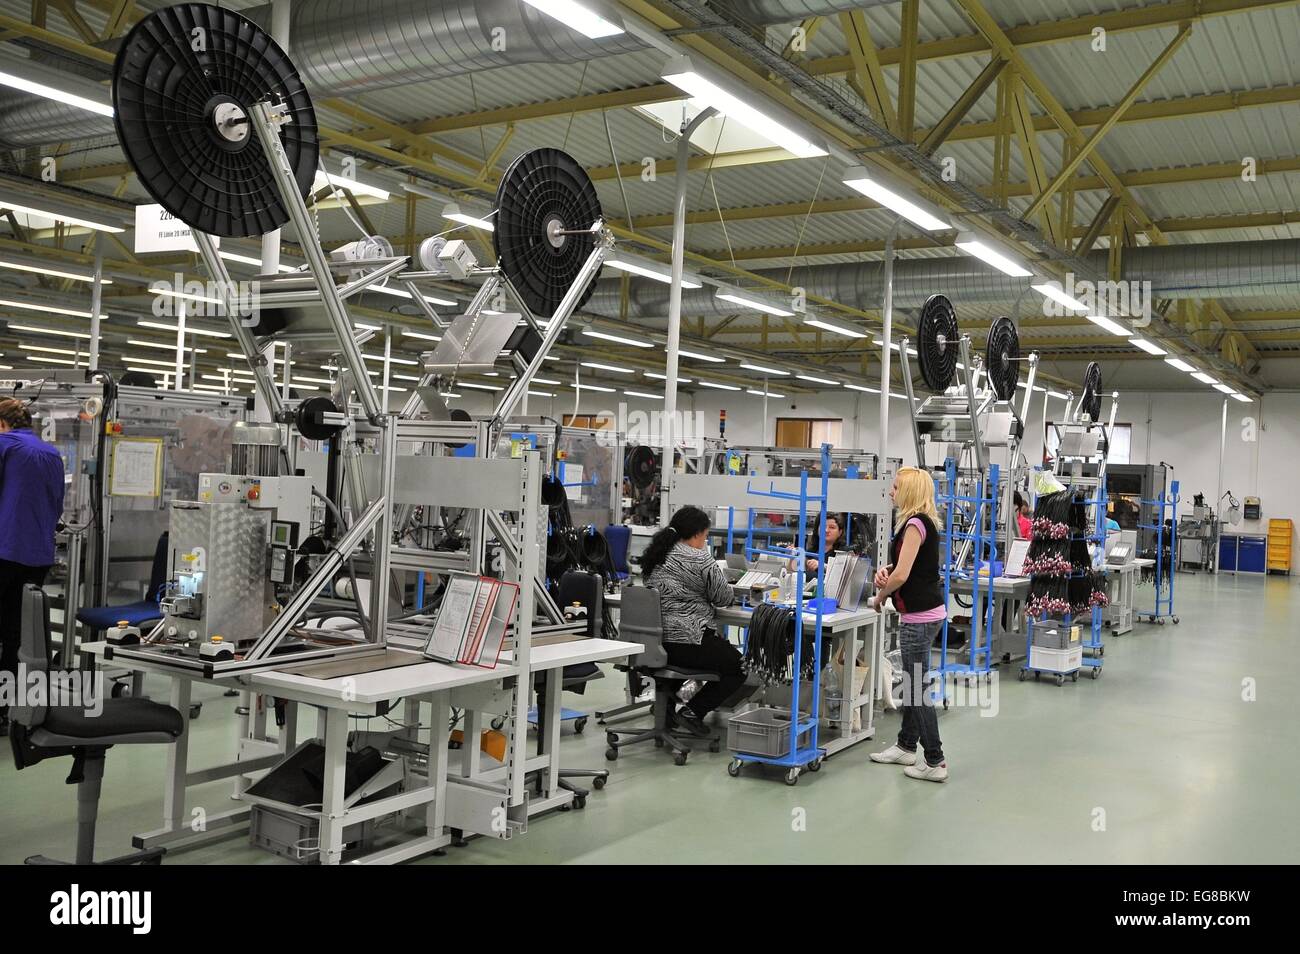 Employees pictured in factory of MD Elektronik Chotesov, which is the leading European producer of multimedia cables for automobiles, in Chotesov, near Pilsen, Czech Republic, February 19, 2015. The company raised sales by a fifth to Kc5.2bn last year, this year plans sales worth Kc5.4bn and its annual profit moves in the order of tens of millions of crowns. By the size of sales, MD Elektronik is the sixth biggest company in the Plzen region and ranks among the top 100 firms in the country. The company with 2,950 employees produces 40,000 kinds of cables. It has been expanding for twenty years Stock Photo